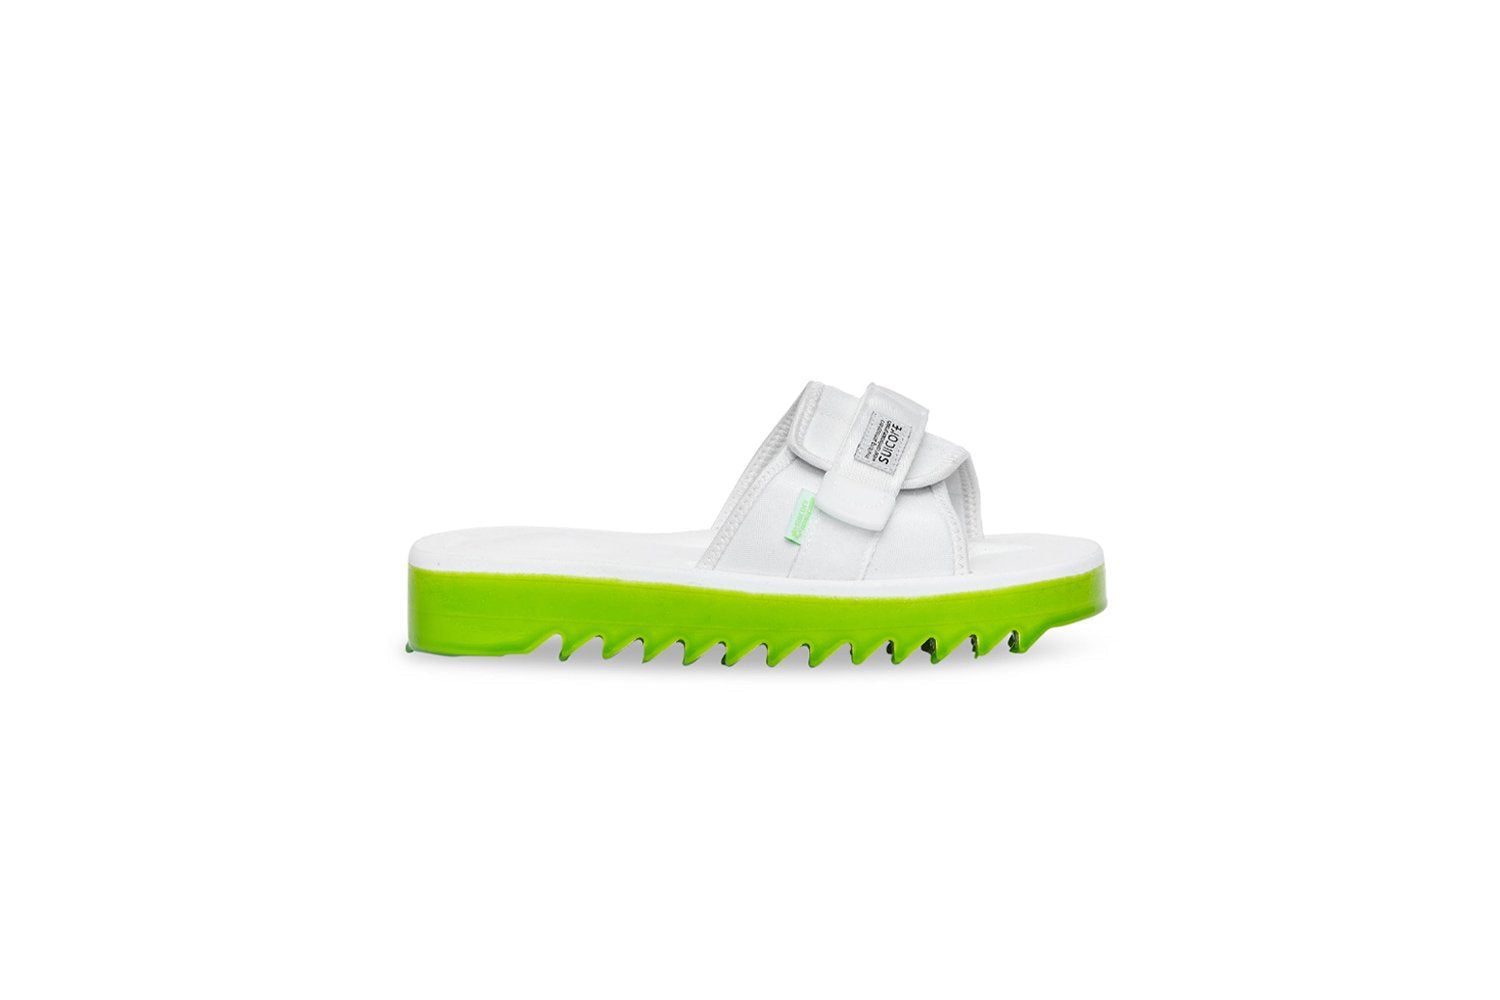 SUICOKE Padri-Slpoab neon green platform shark sole slide sandal, with white footbed and straps. From SUICOKE SS21 collection.